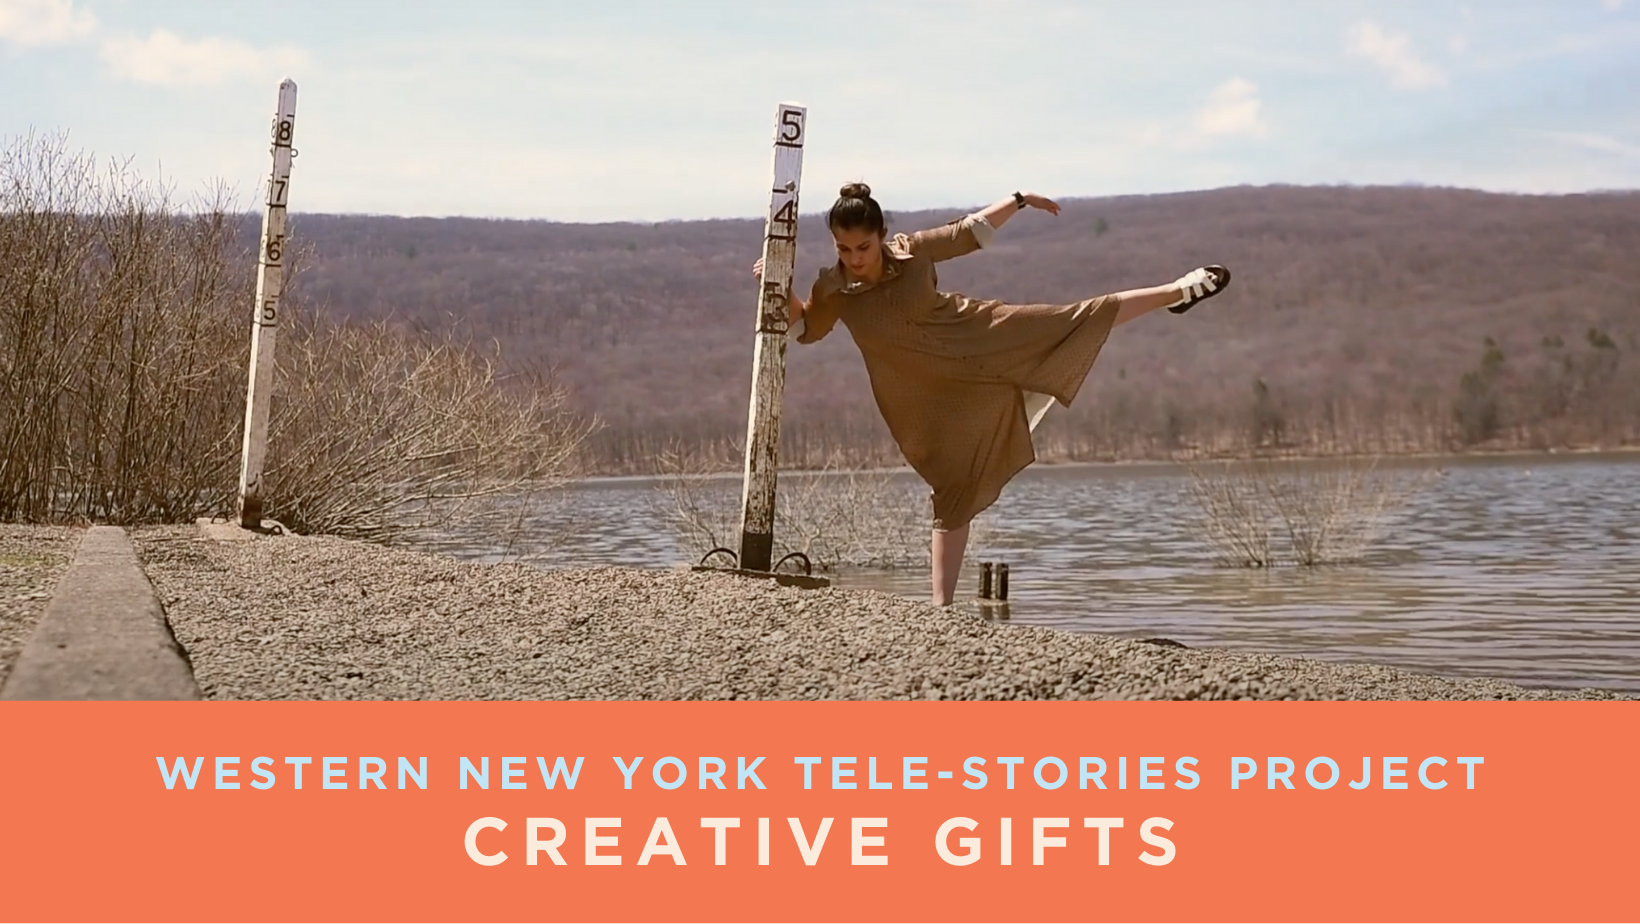 Person dancing outside with text "Western New York Tele-Stories Project: Creative Gifts"